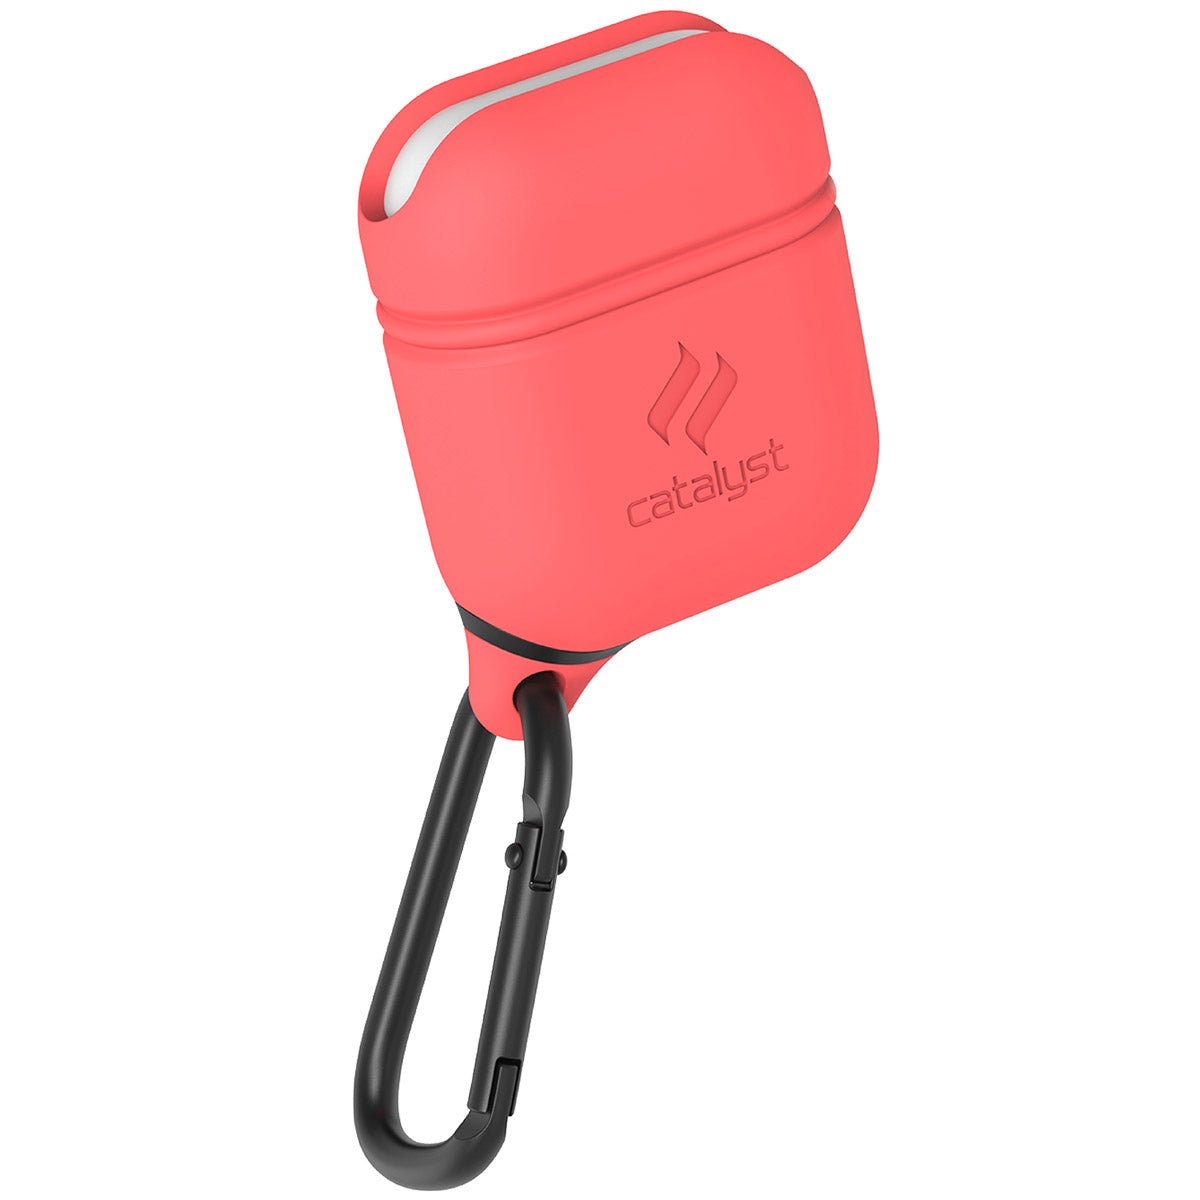 Catalyst airpods gen2/1 waterproof case + carabiner showing the front view of the case in coral